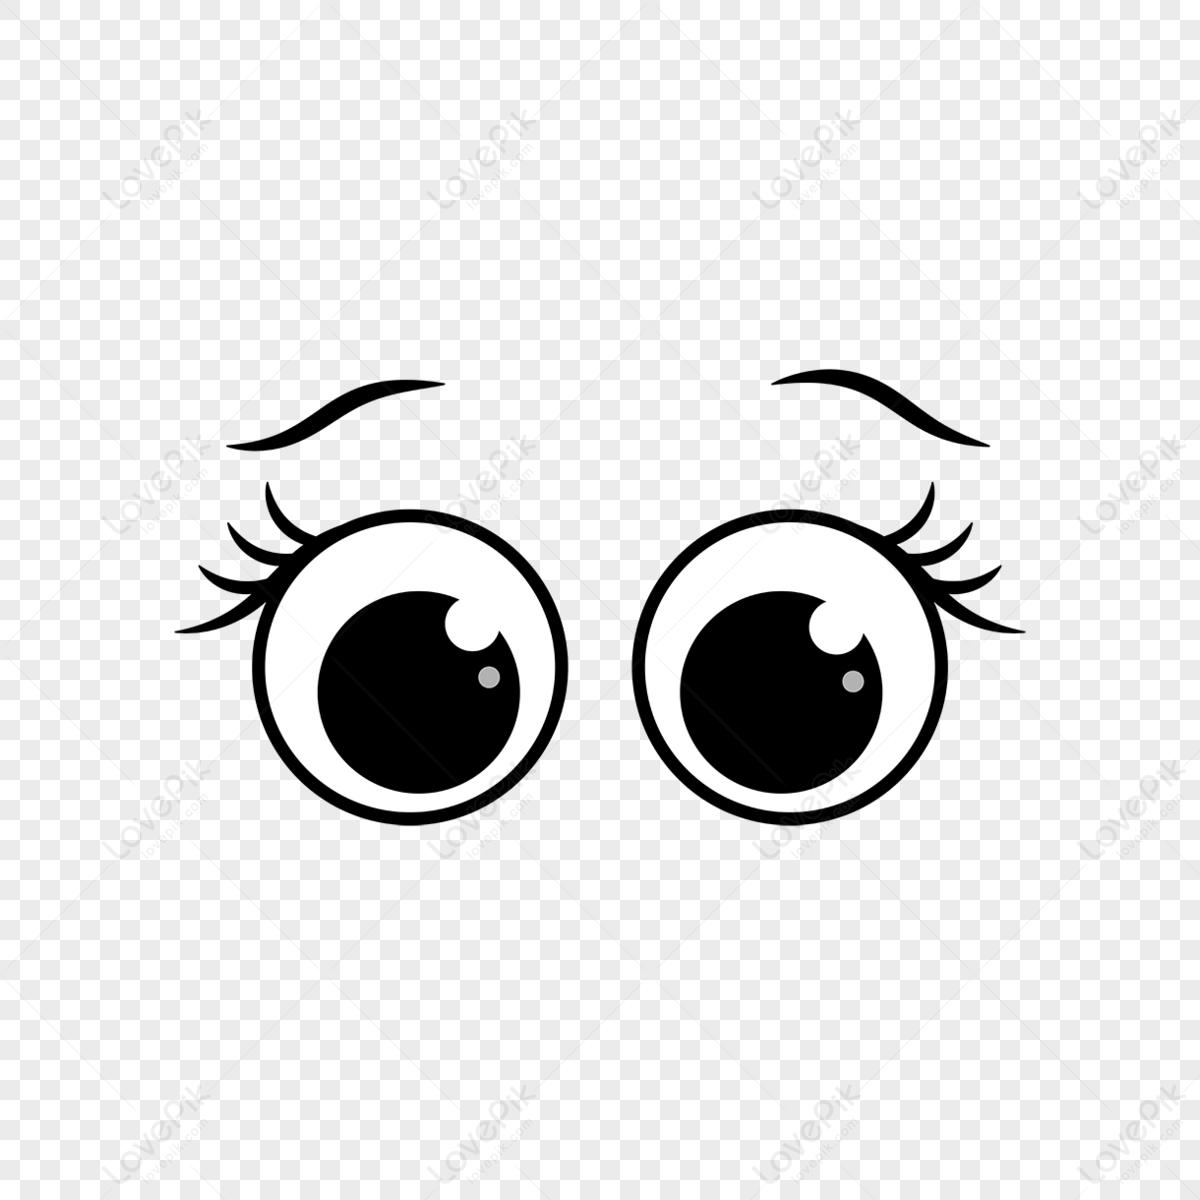 Cartoon anime cute round big eyes eyebrow material eyes clipart anime eyes png transparent image